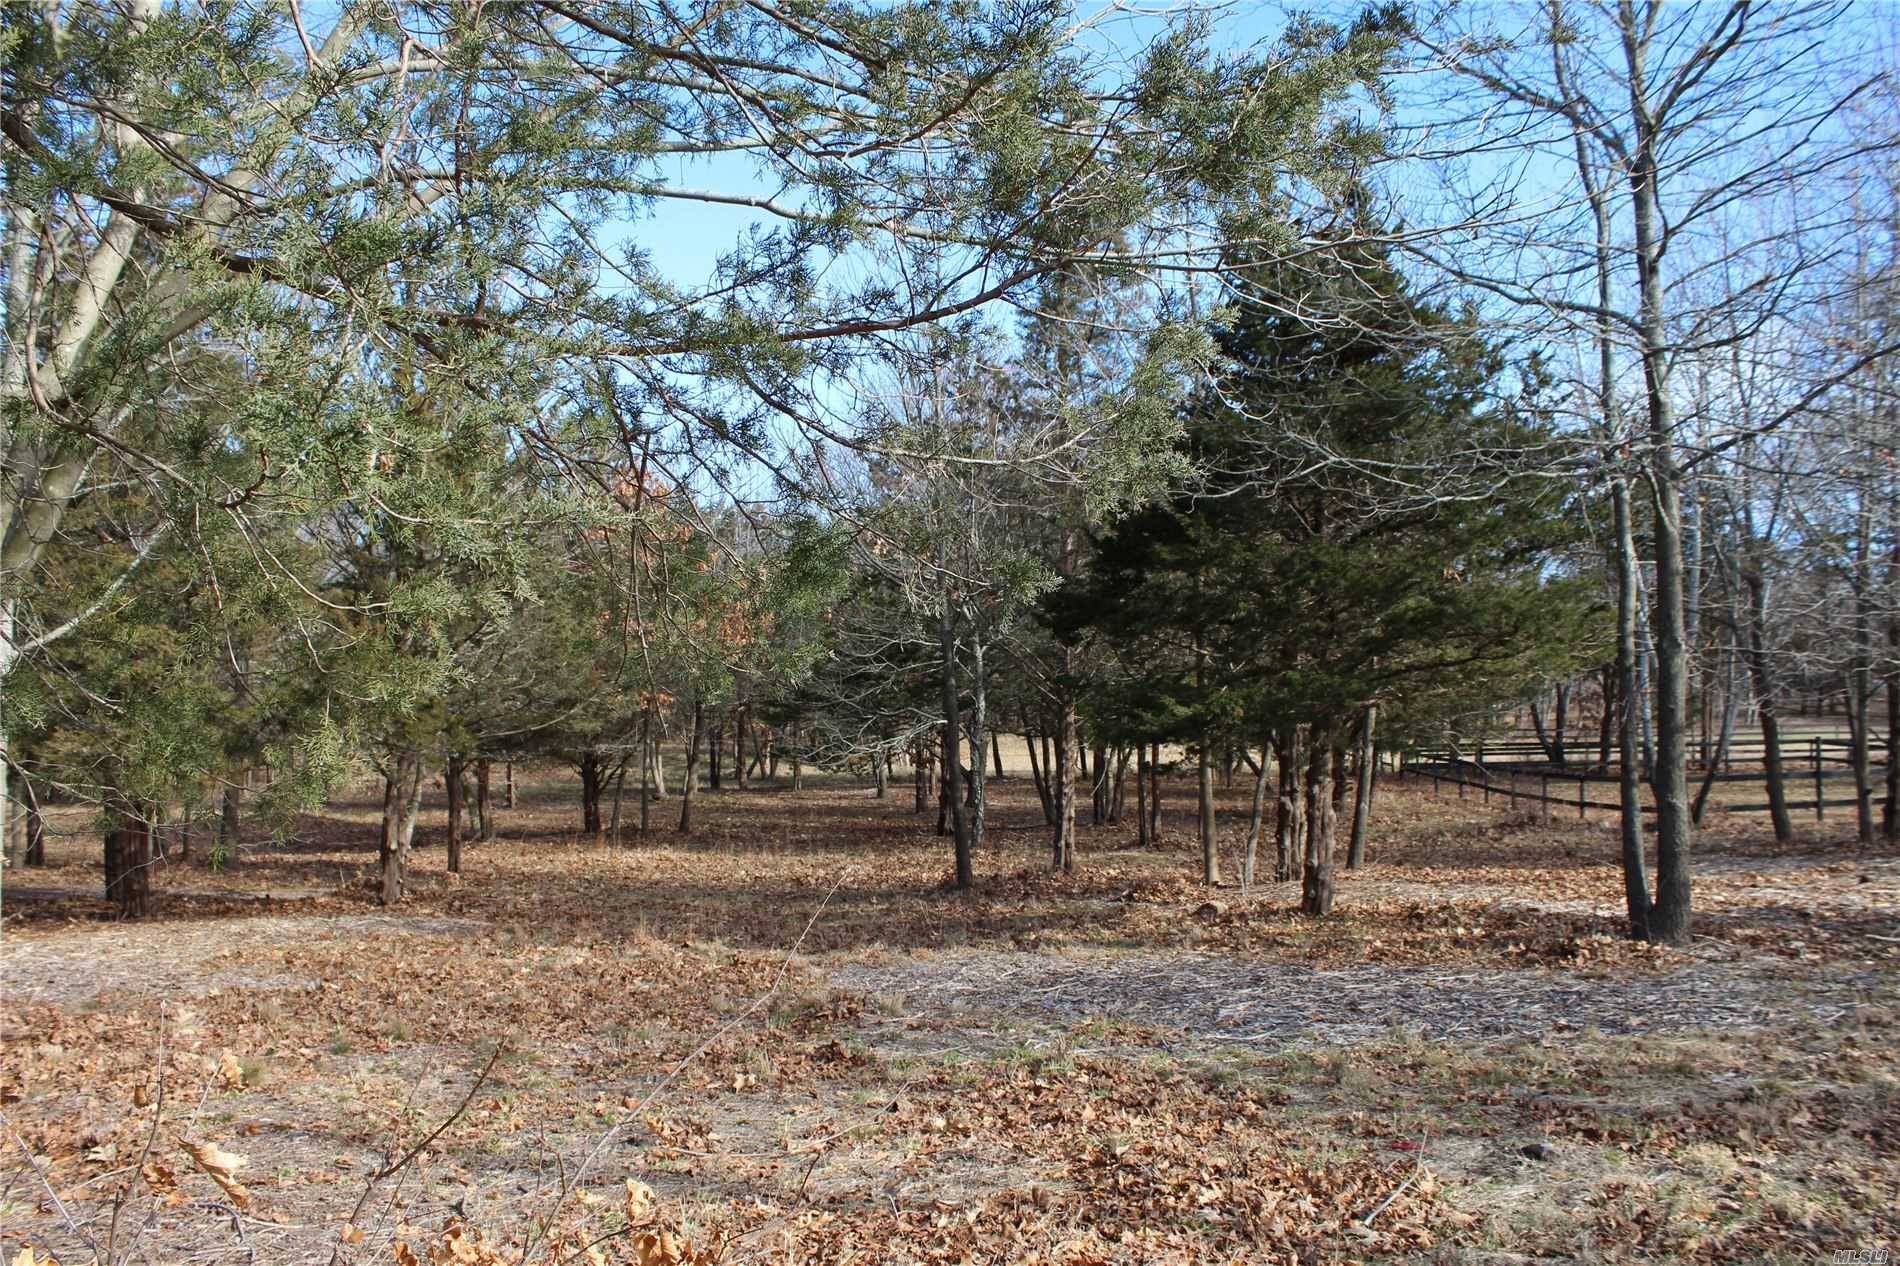 Aquebogue Residential Lot in Farm Country Horses Permitted Partially cleared.